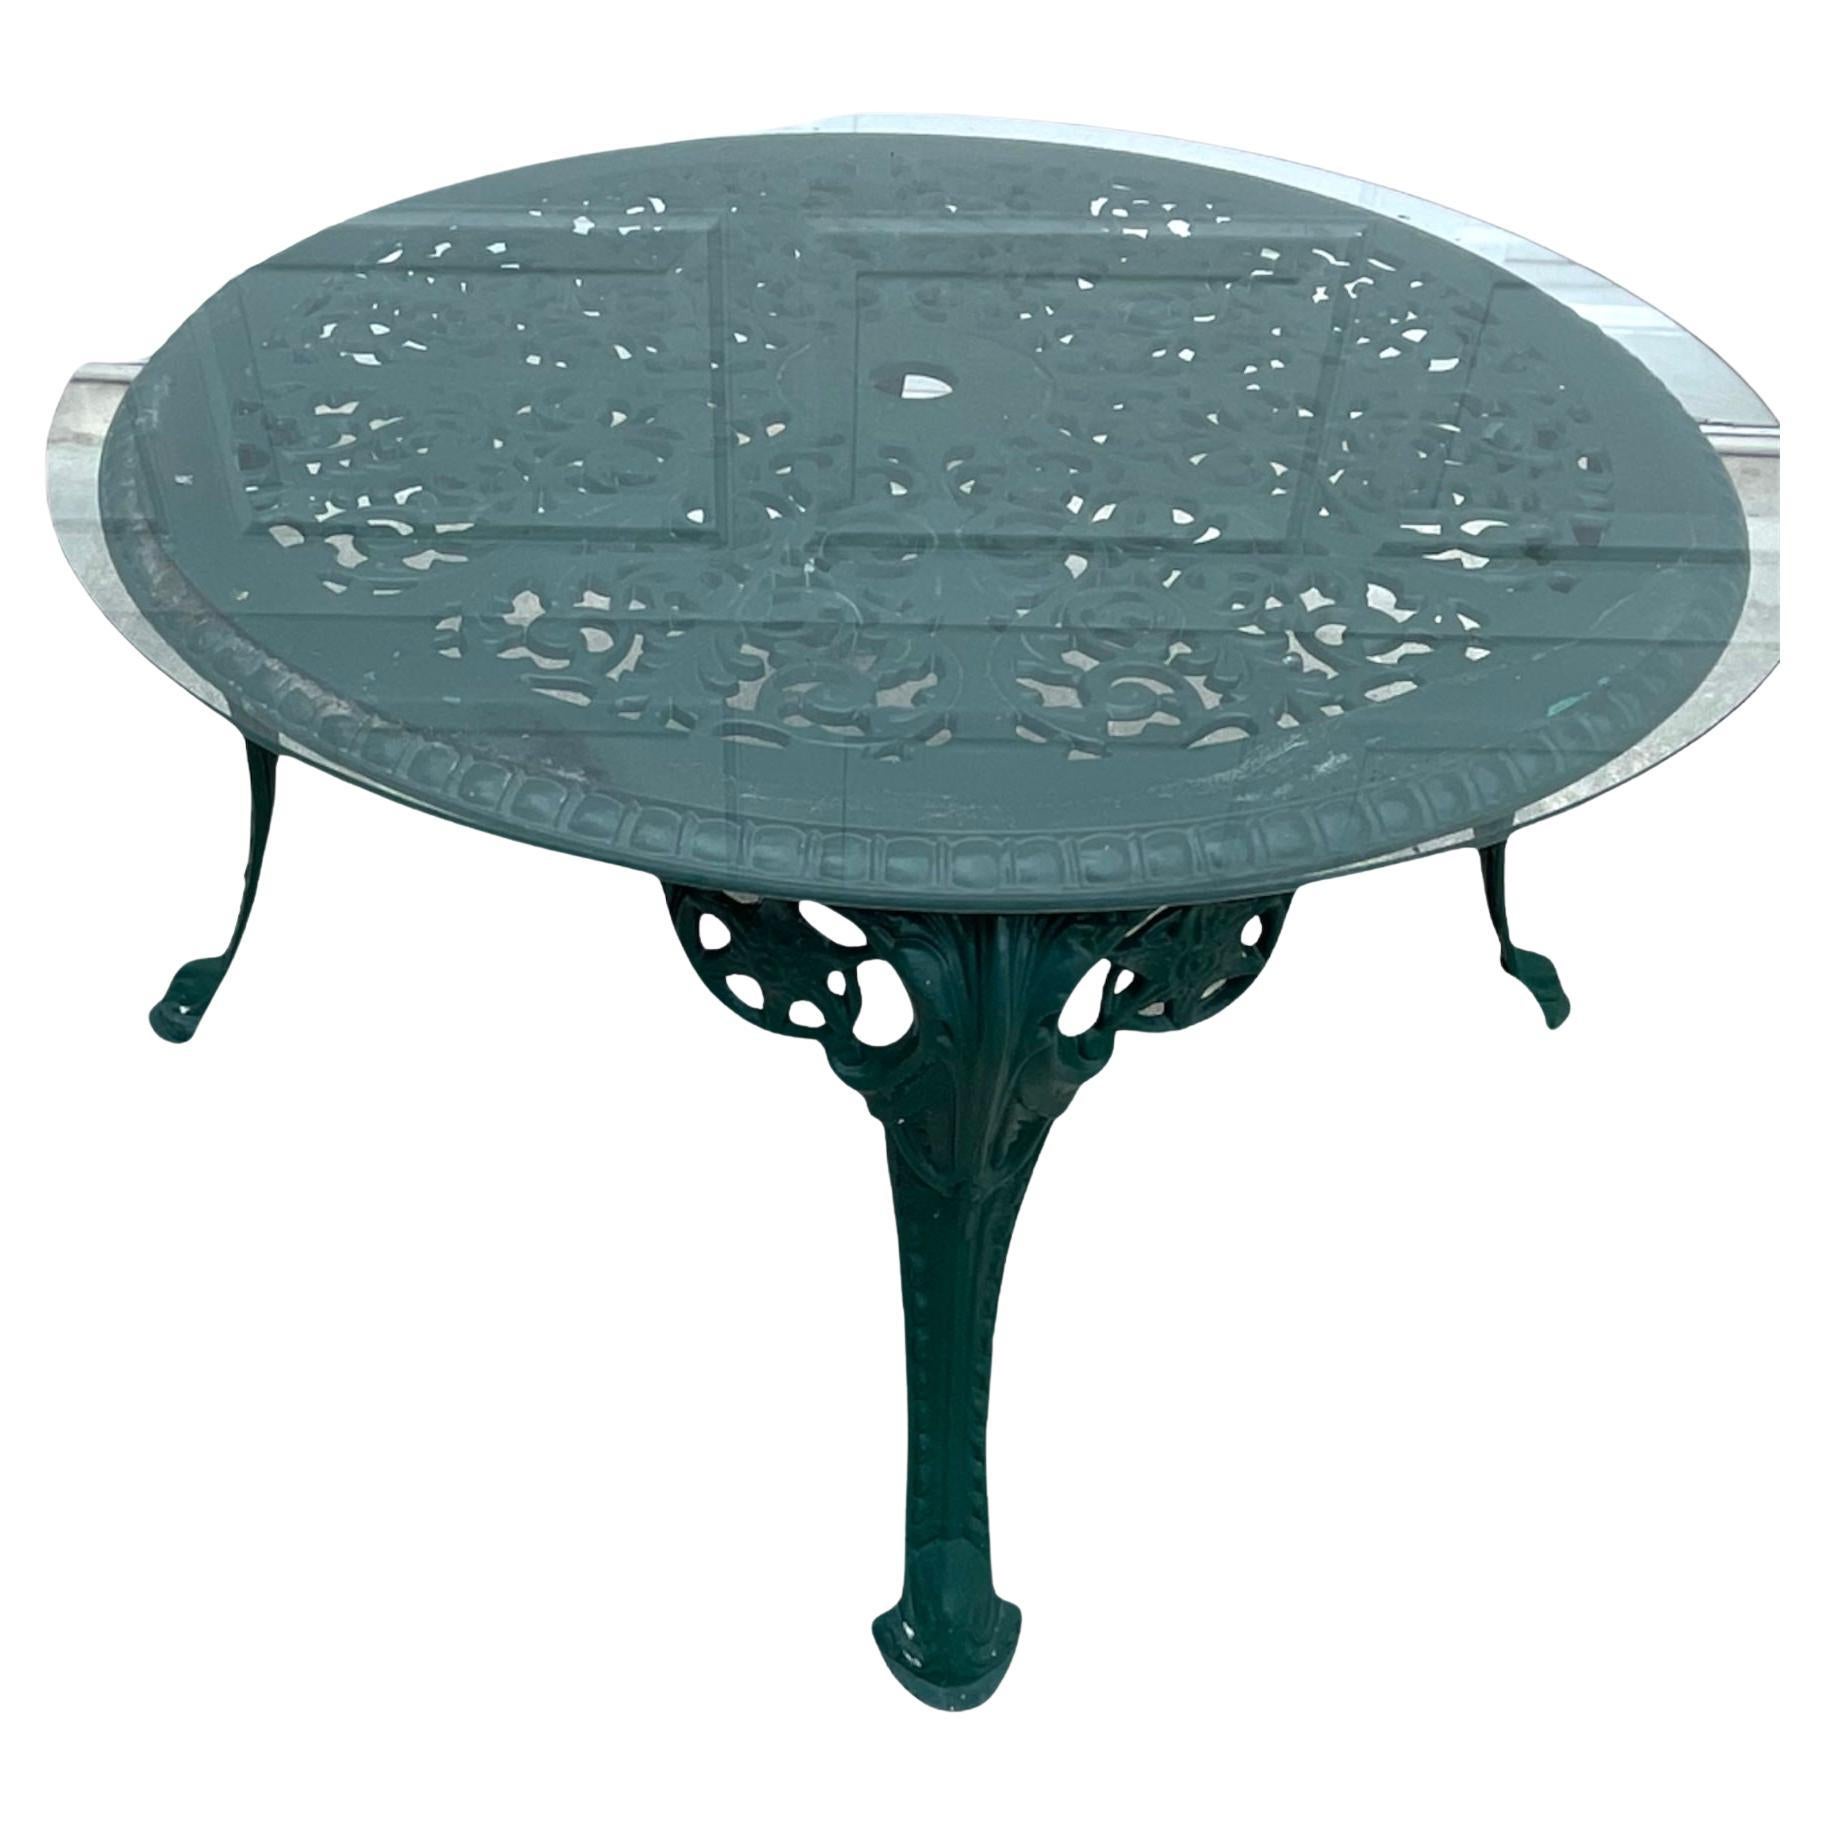 Wonderful table for the garden, the perfect height and size, no glass but you could always add but not needed. The legs have a beautiful curve which make for a nice design element.,
See other piece available that will and are listed.